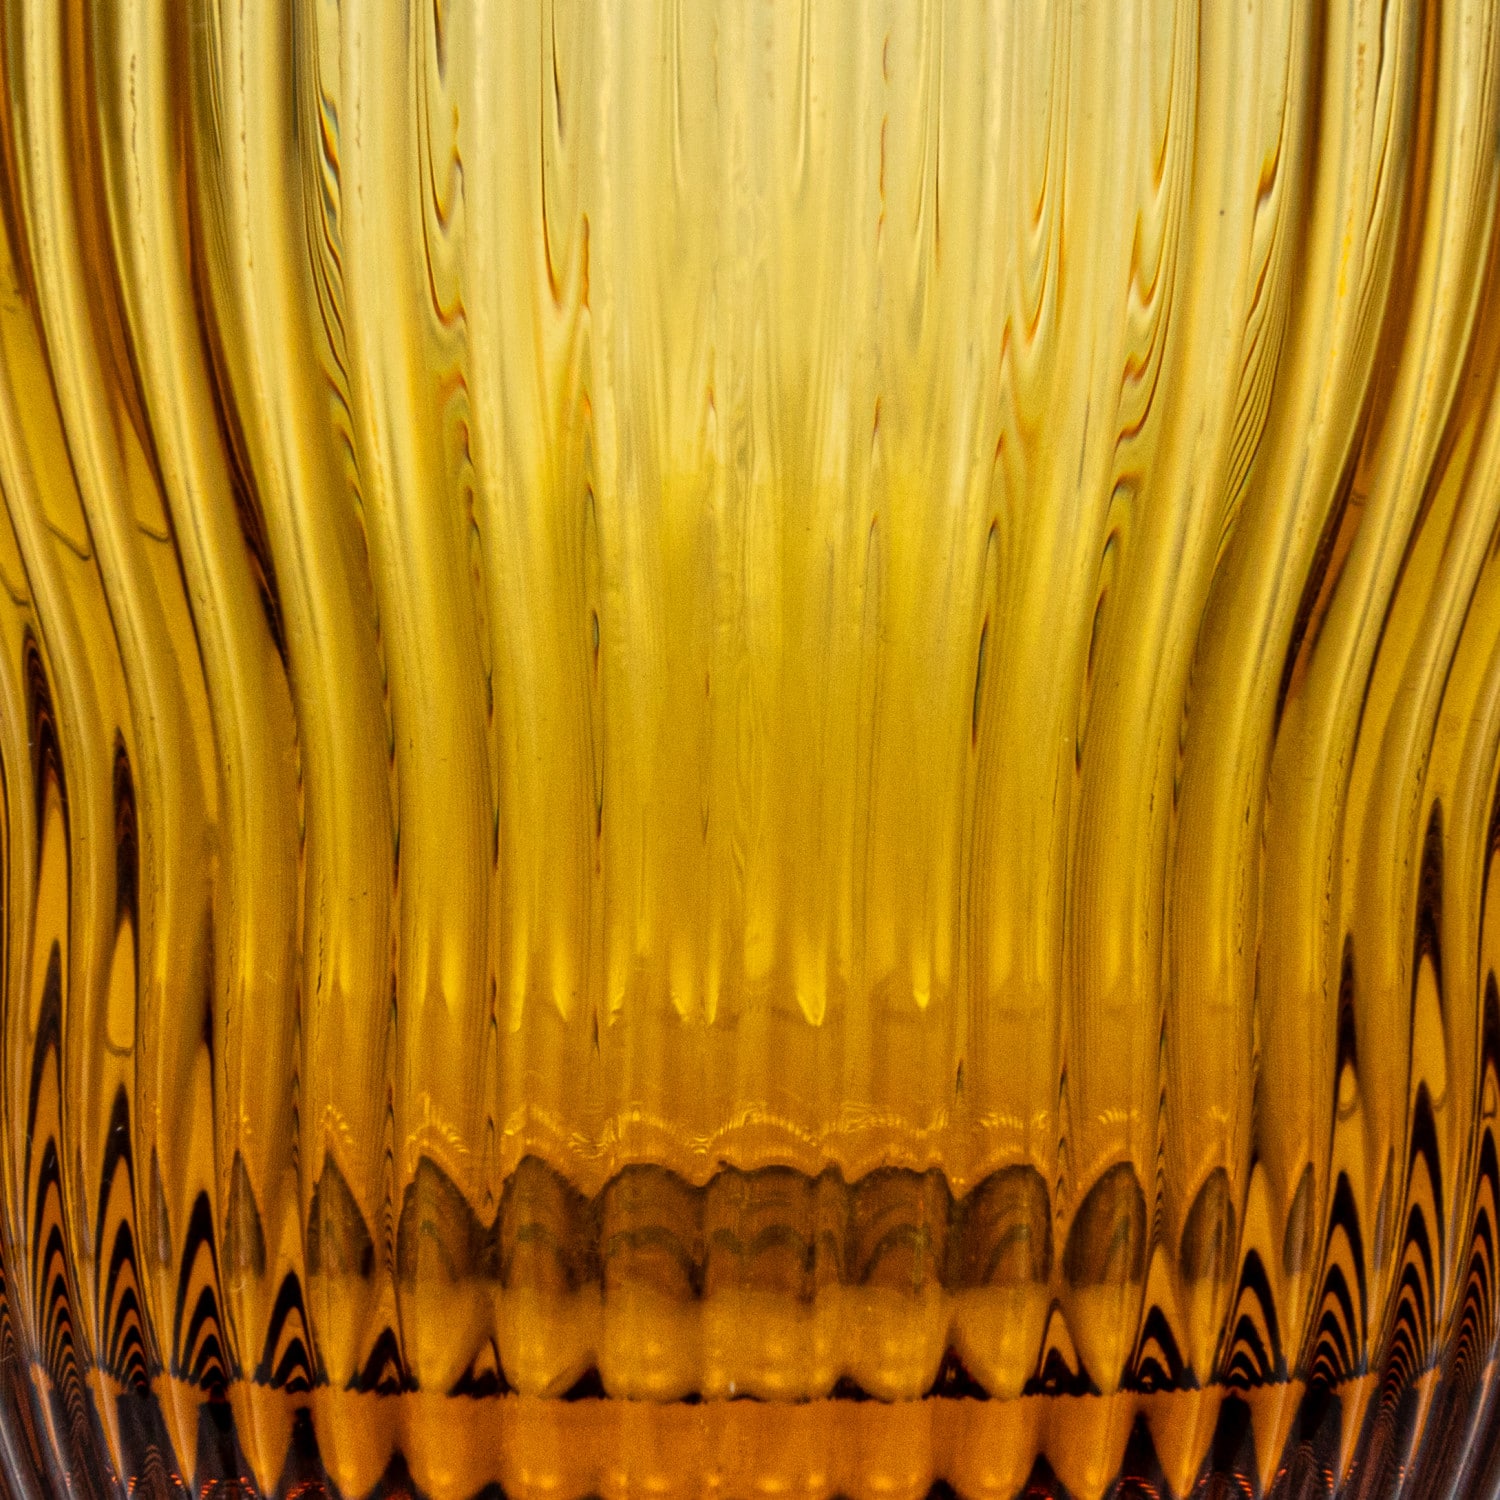 8oz. Amber Ribbed Drinking Glass